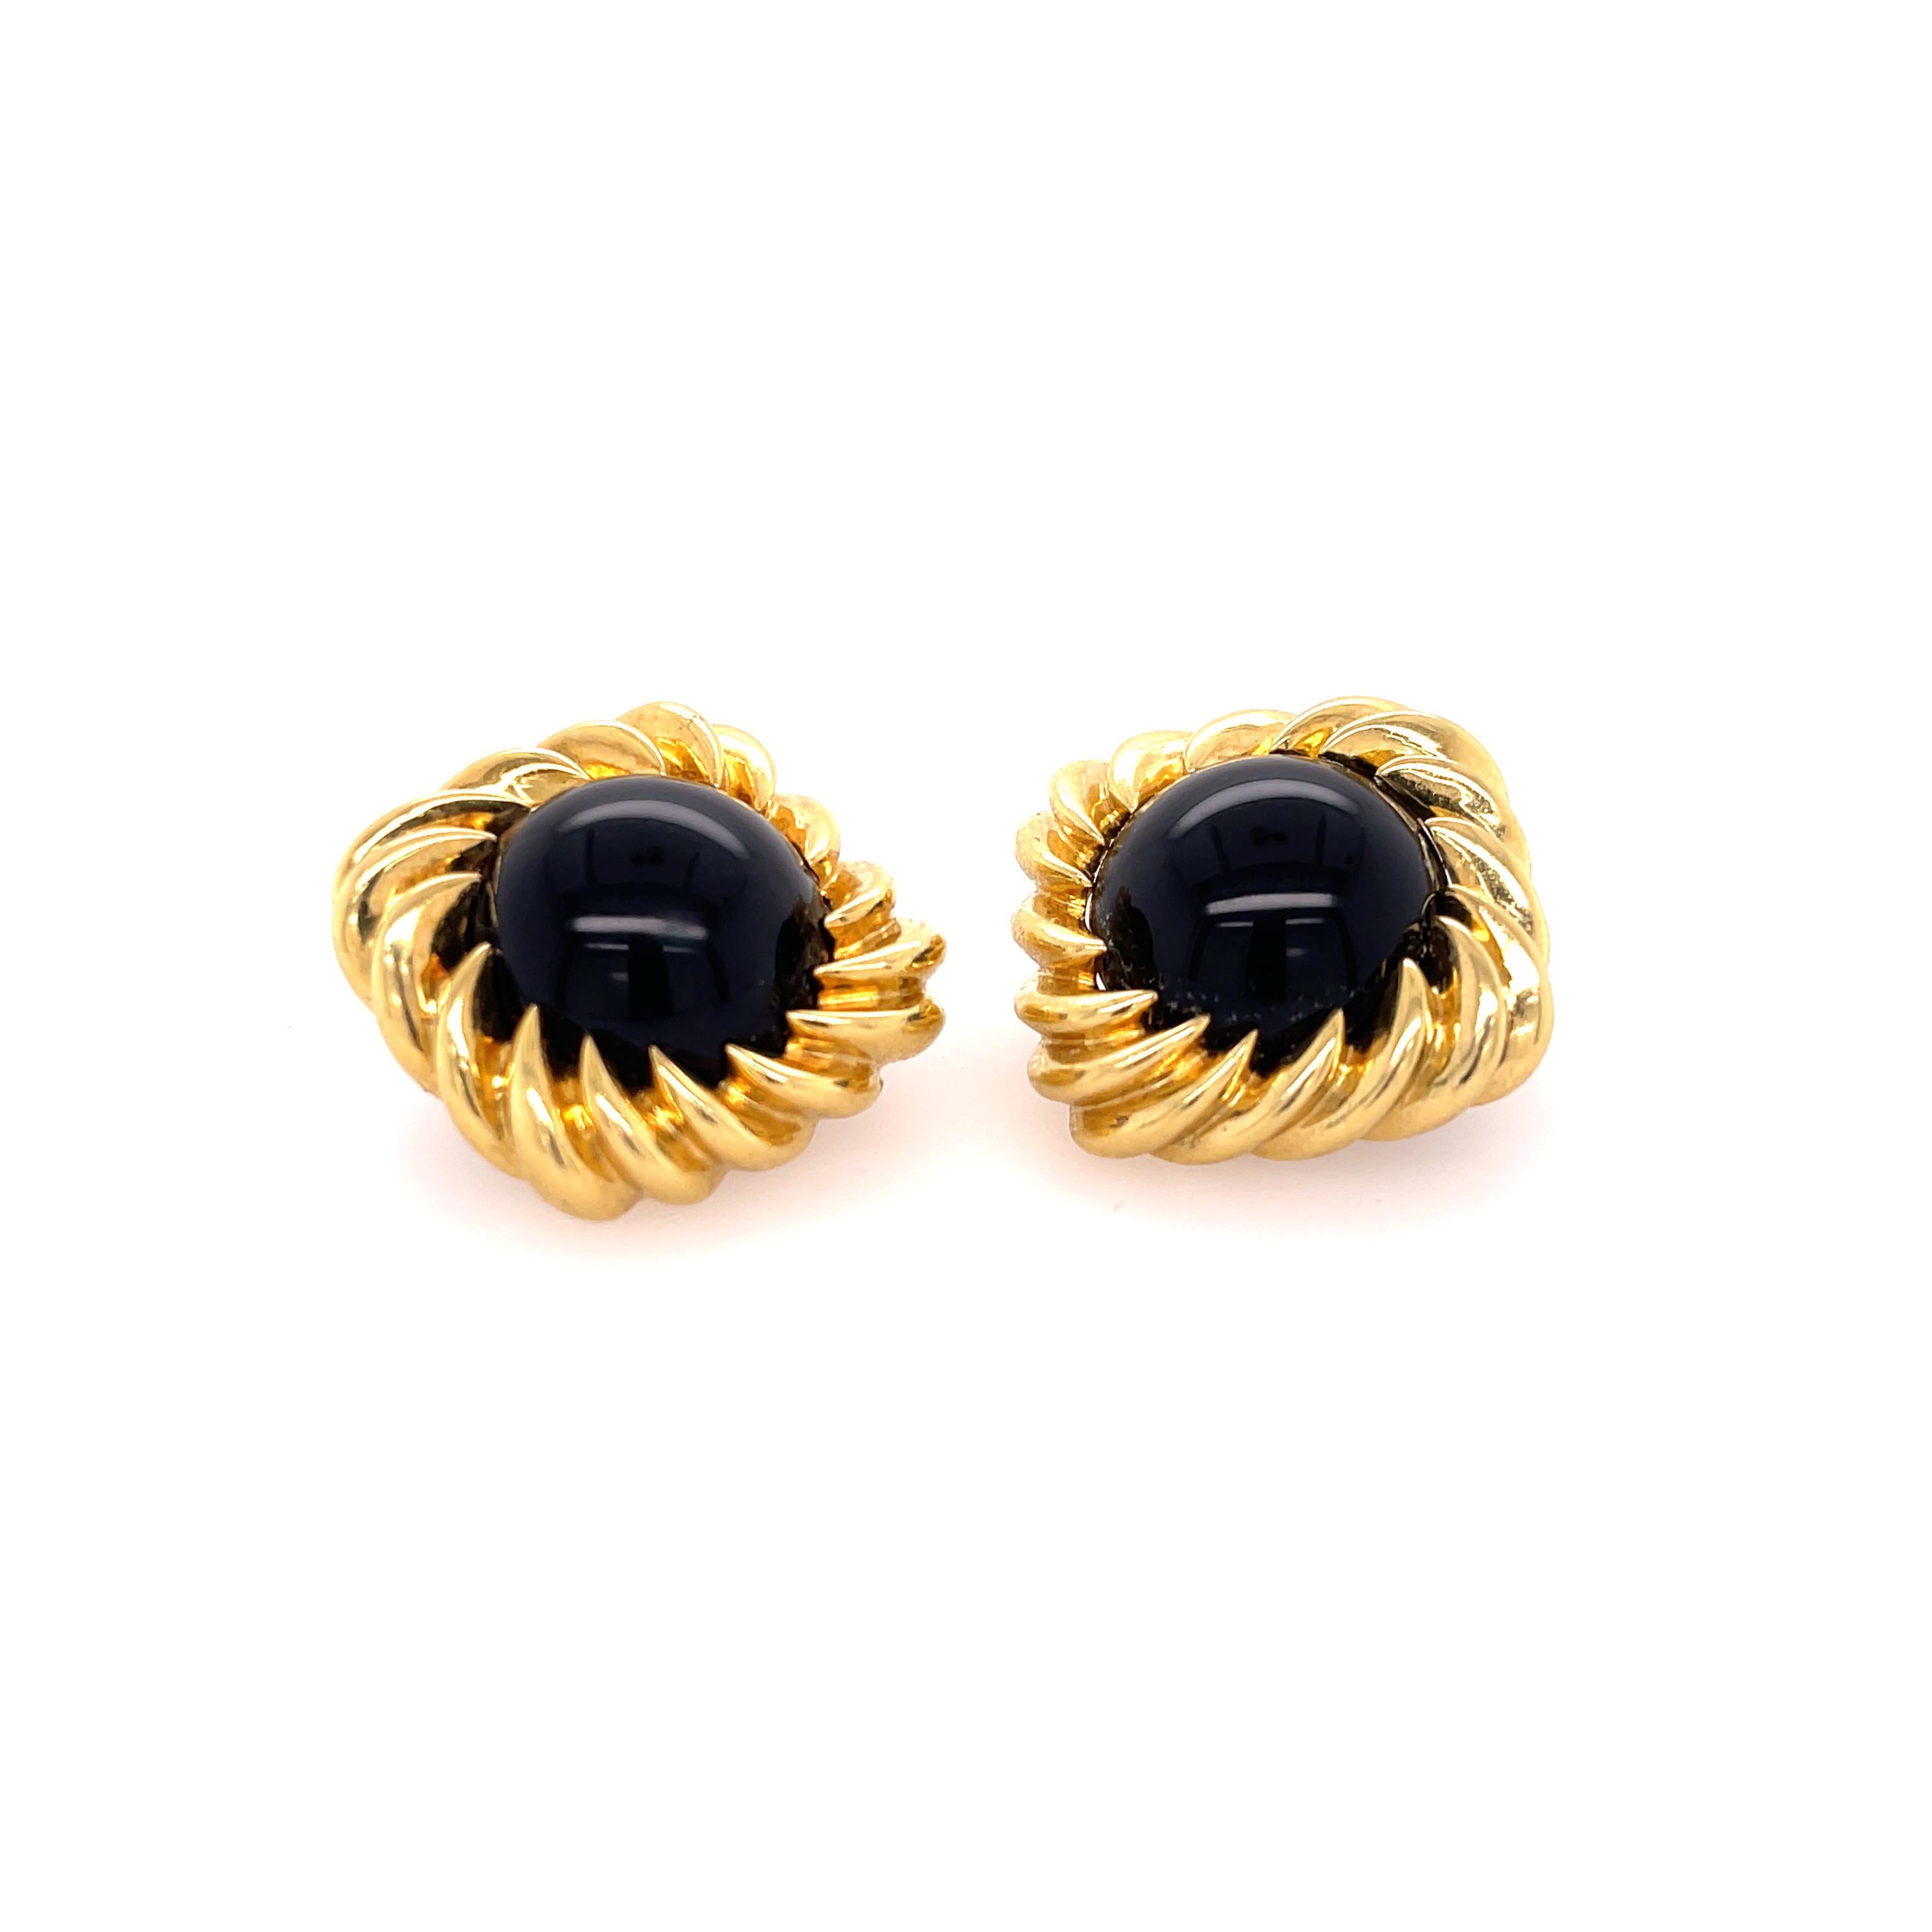 Onyx clip-on earrings in 18K yellow gold. Stamped 750 SBMC.

